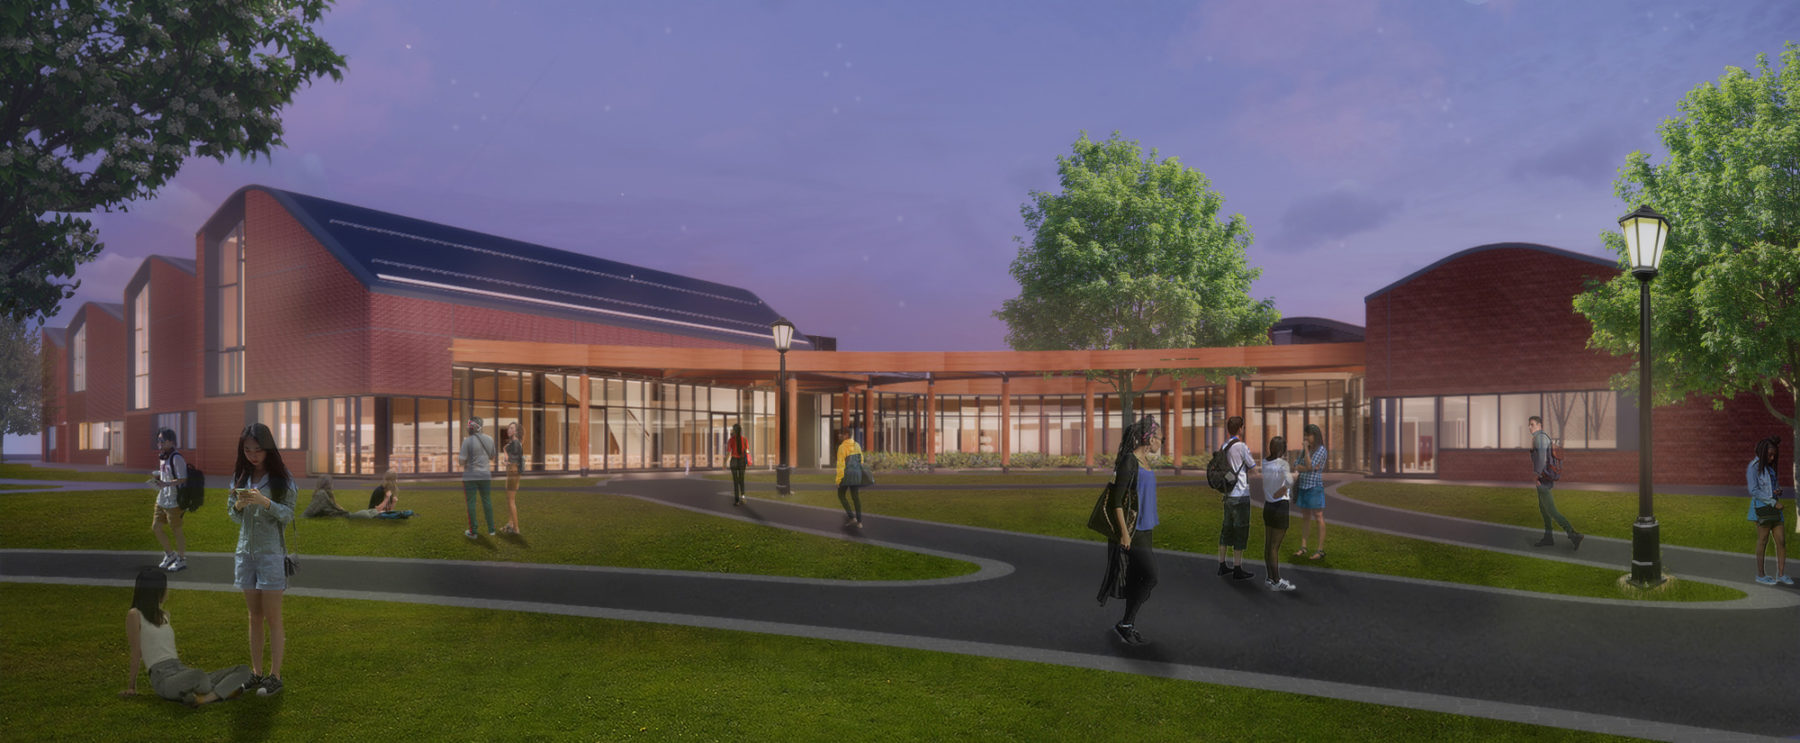 exterior rendering showing grass courtyard and paths connecting campus